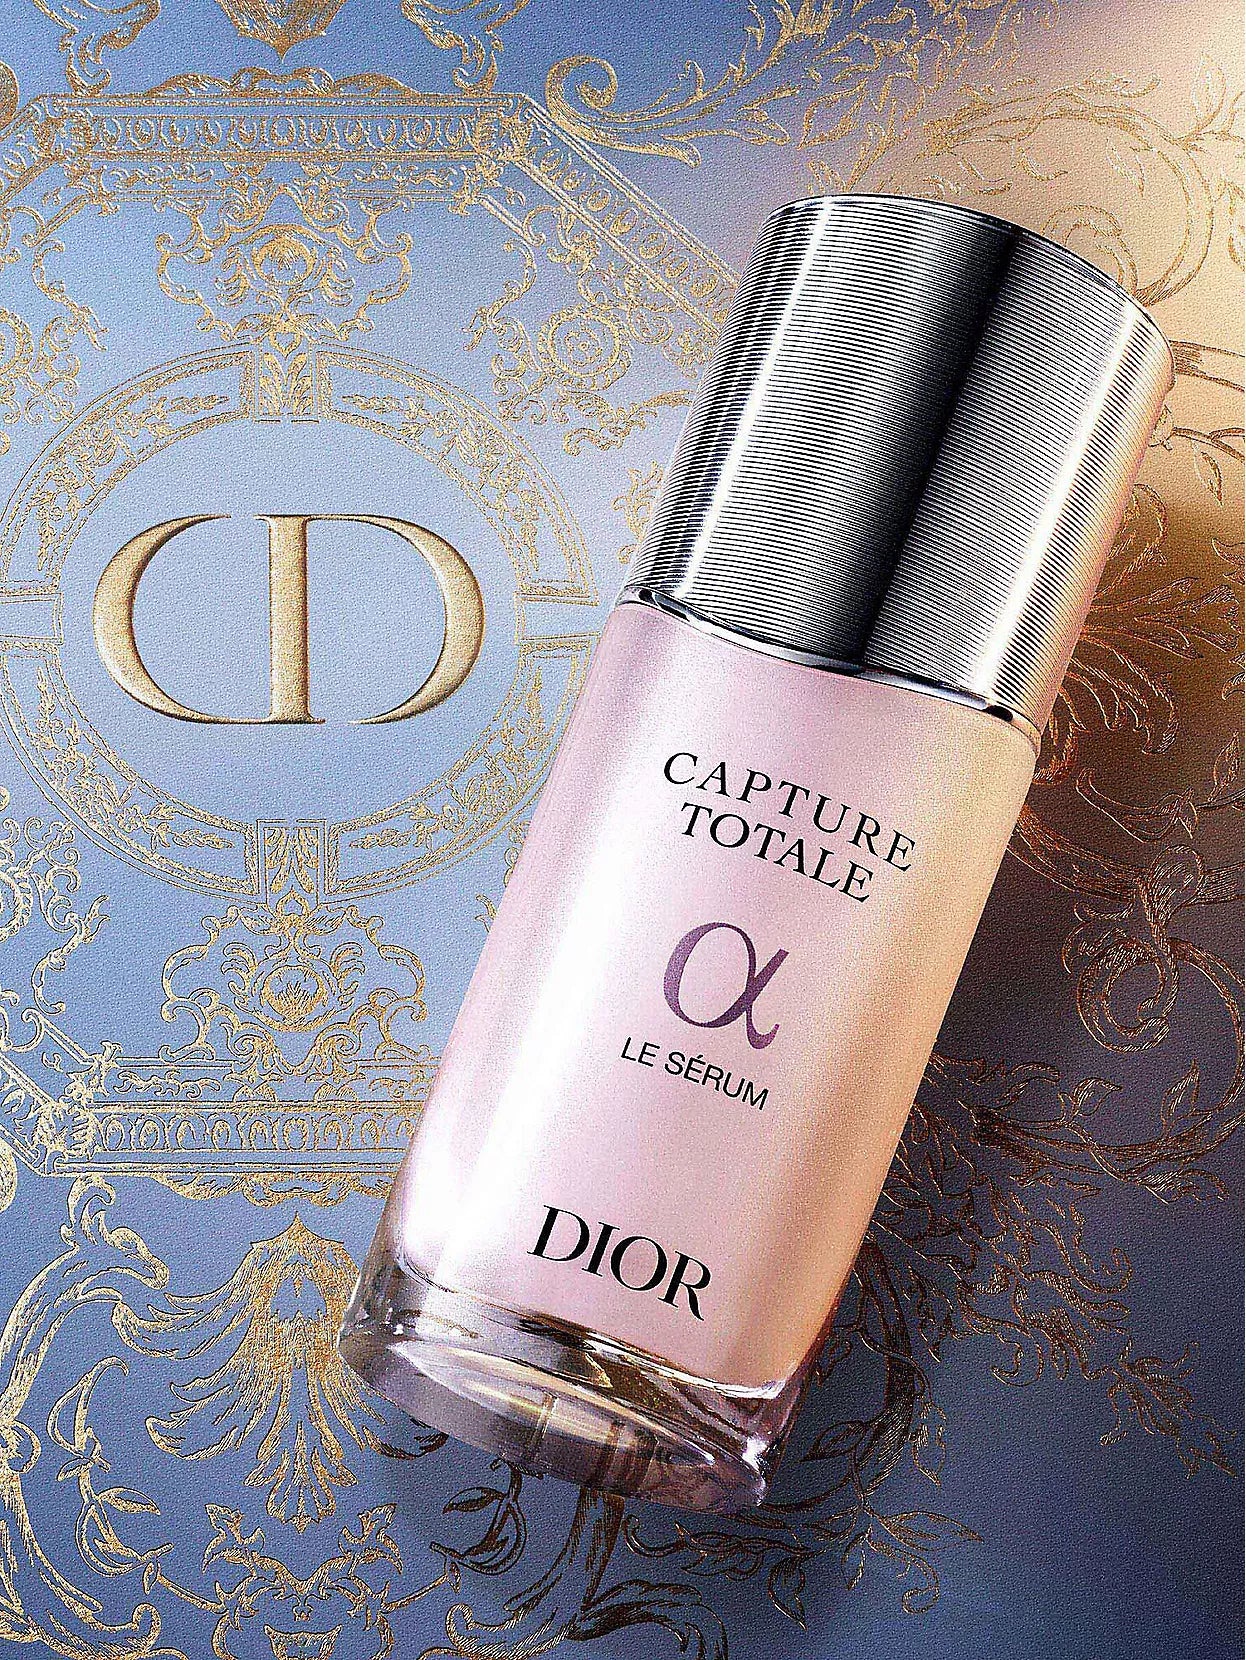 Dior Capture Totale Anti-Aging Limited-Edition Gift Set